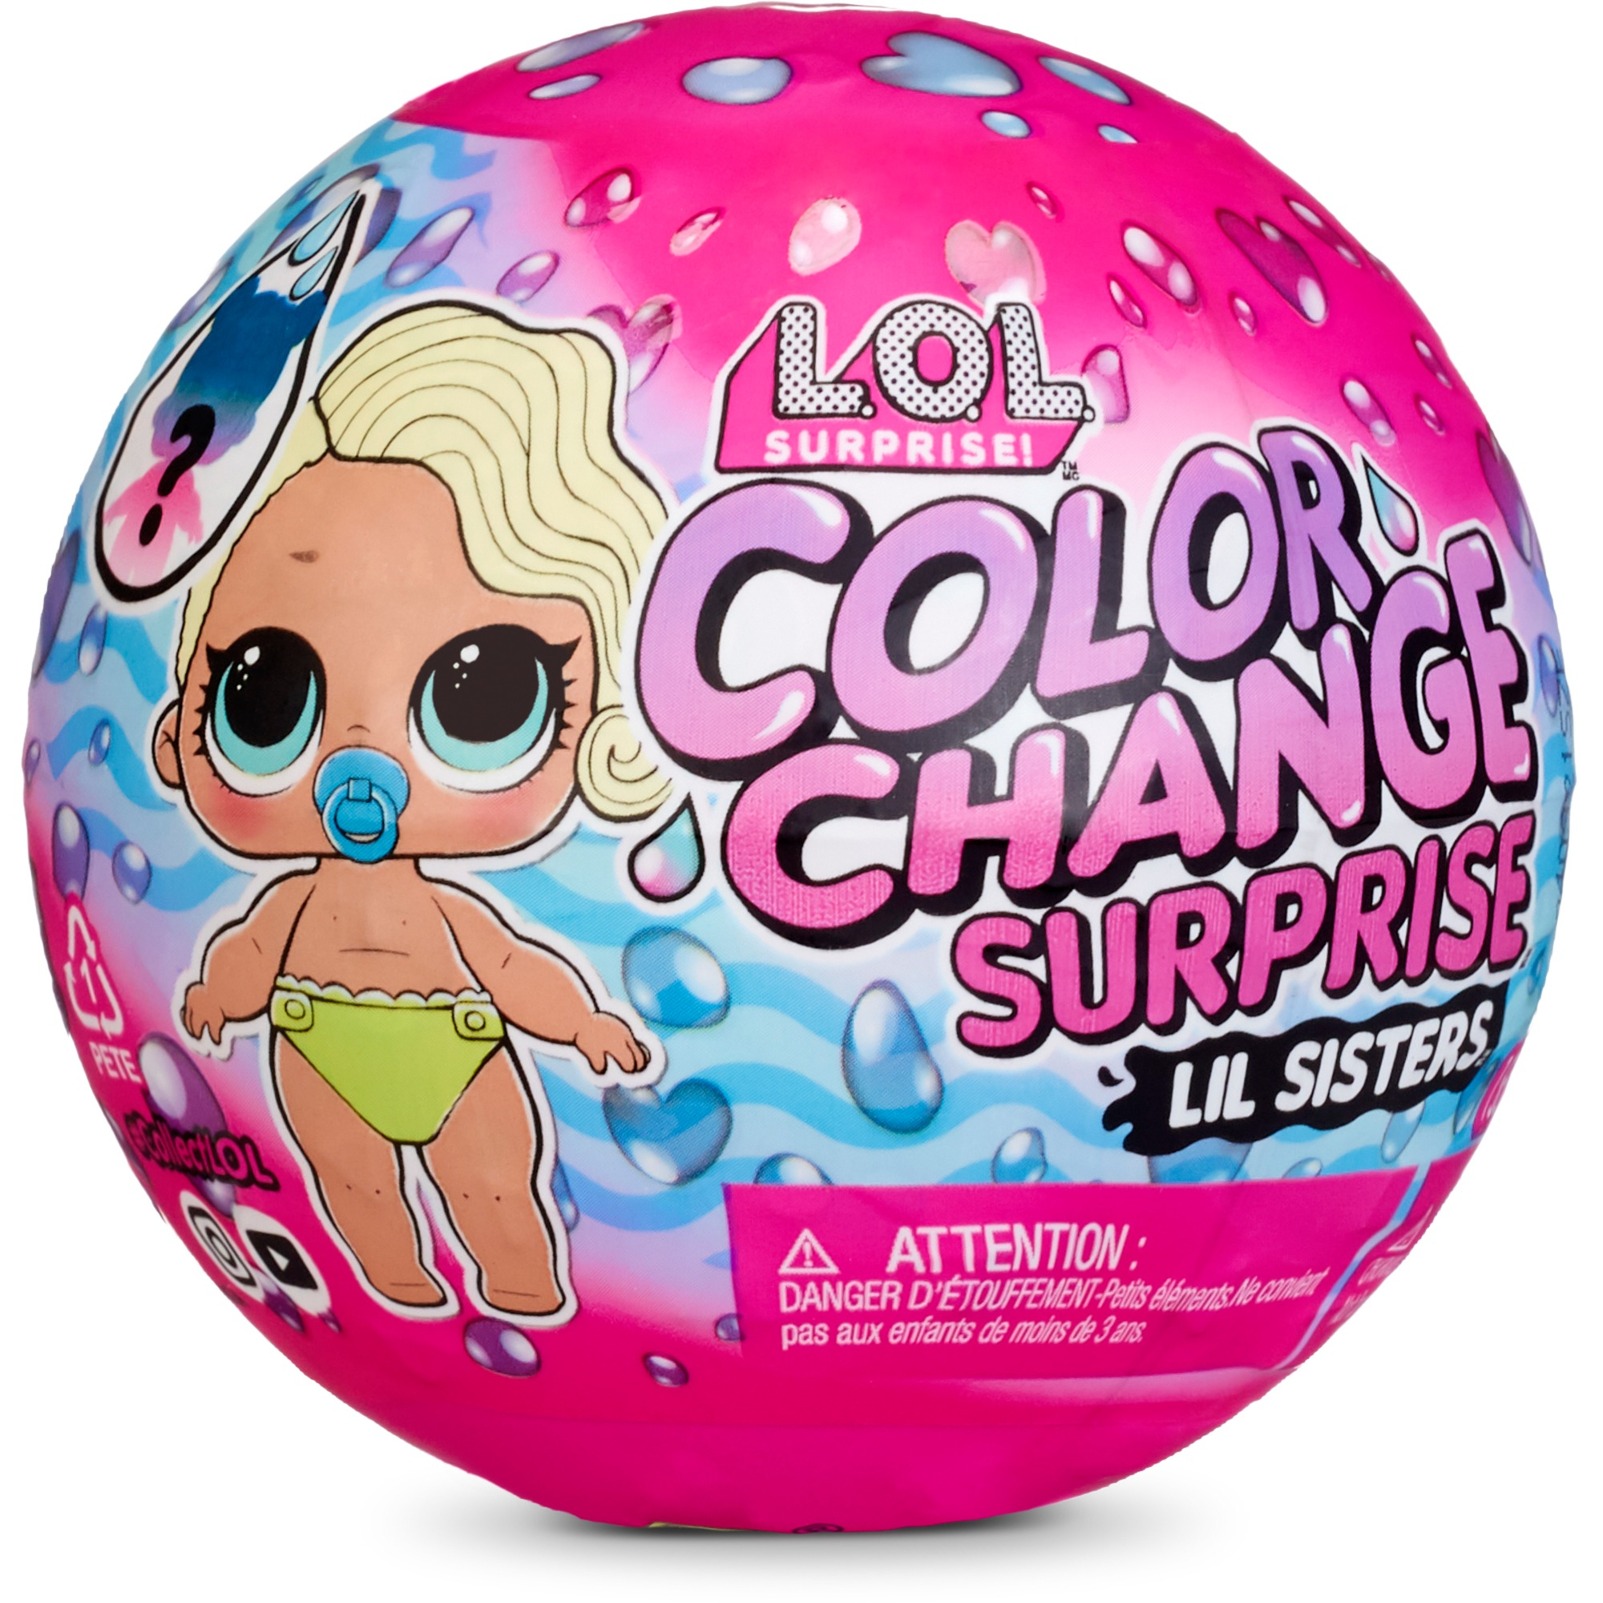 Image of Alternate - L.O.L. Surprise Color Change Lil Sisters Asst in PDQ, Puppe online einkaufen bei Alternate